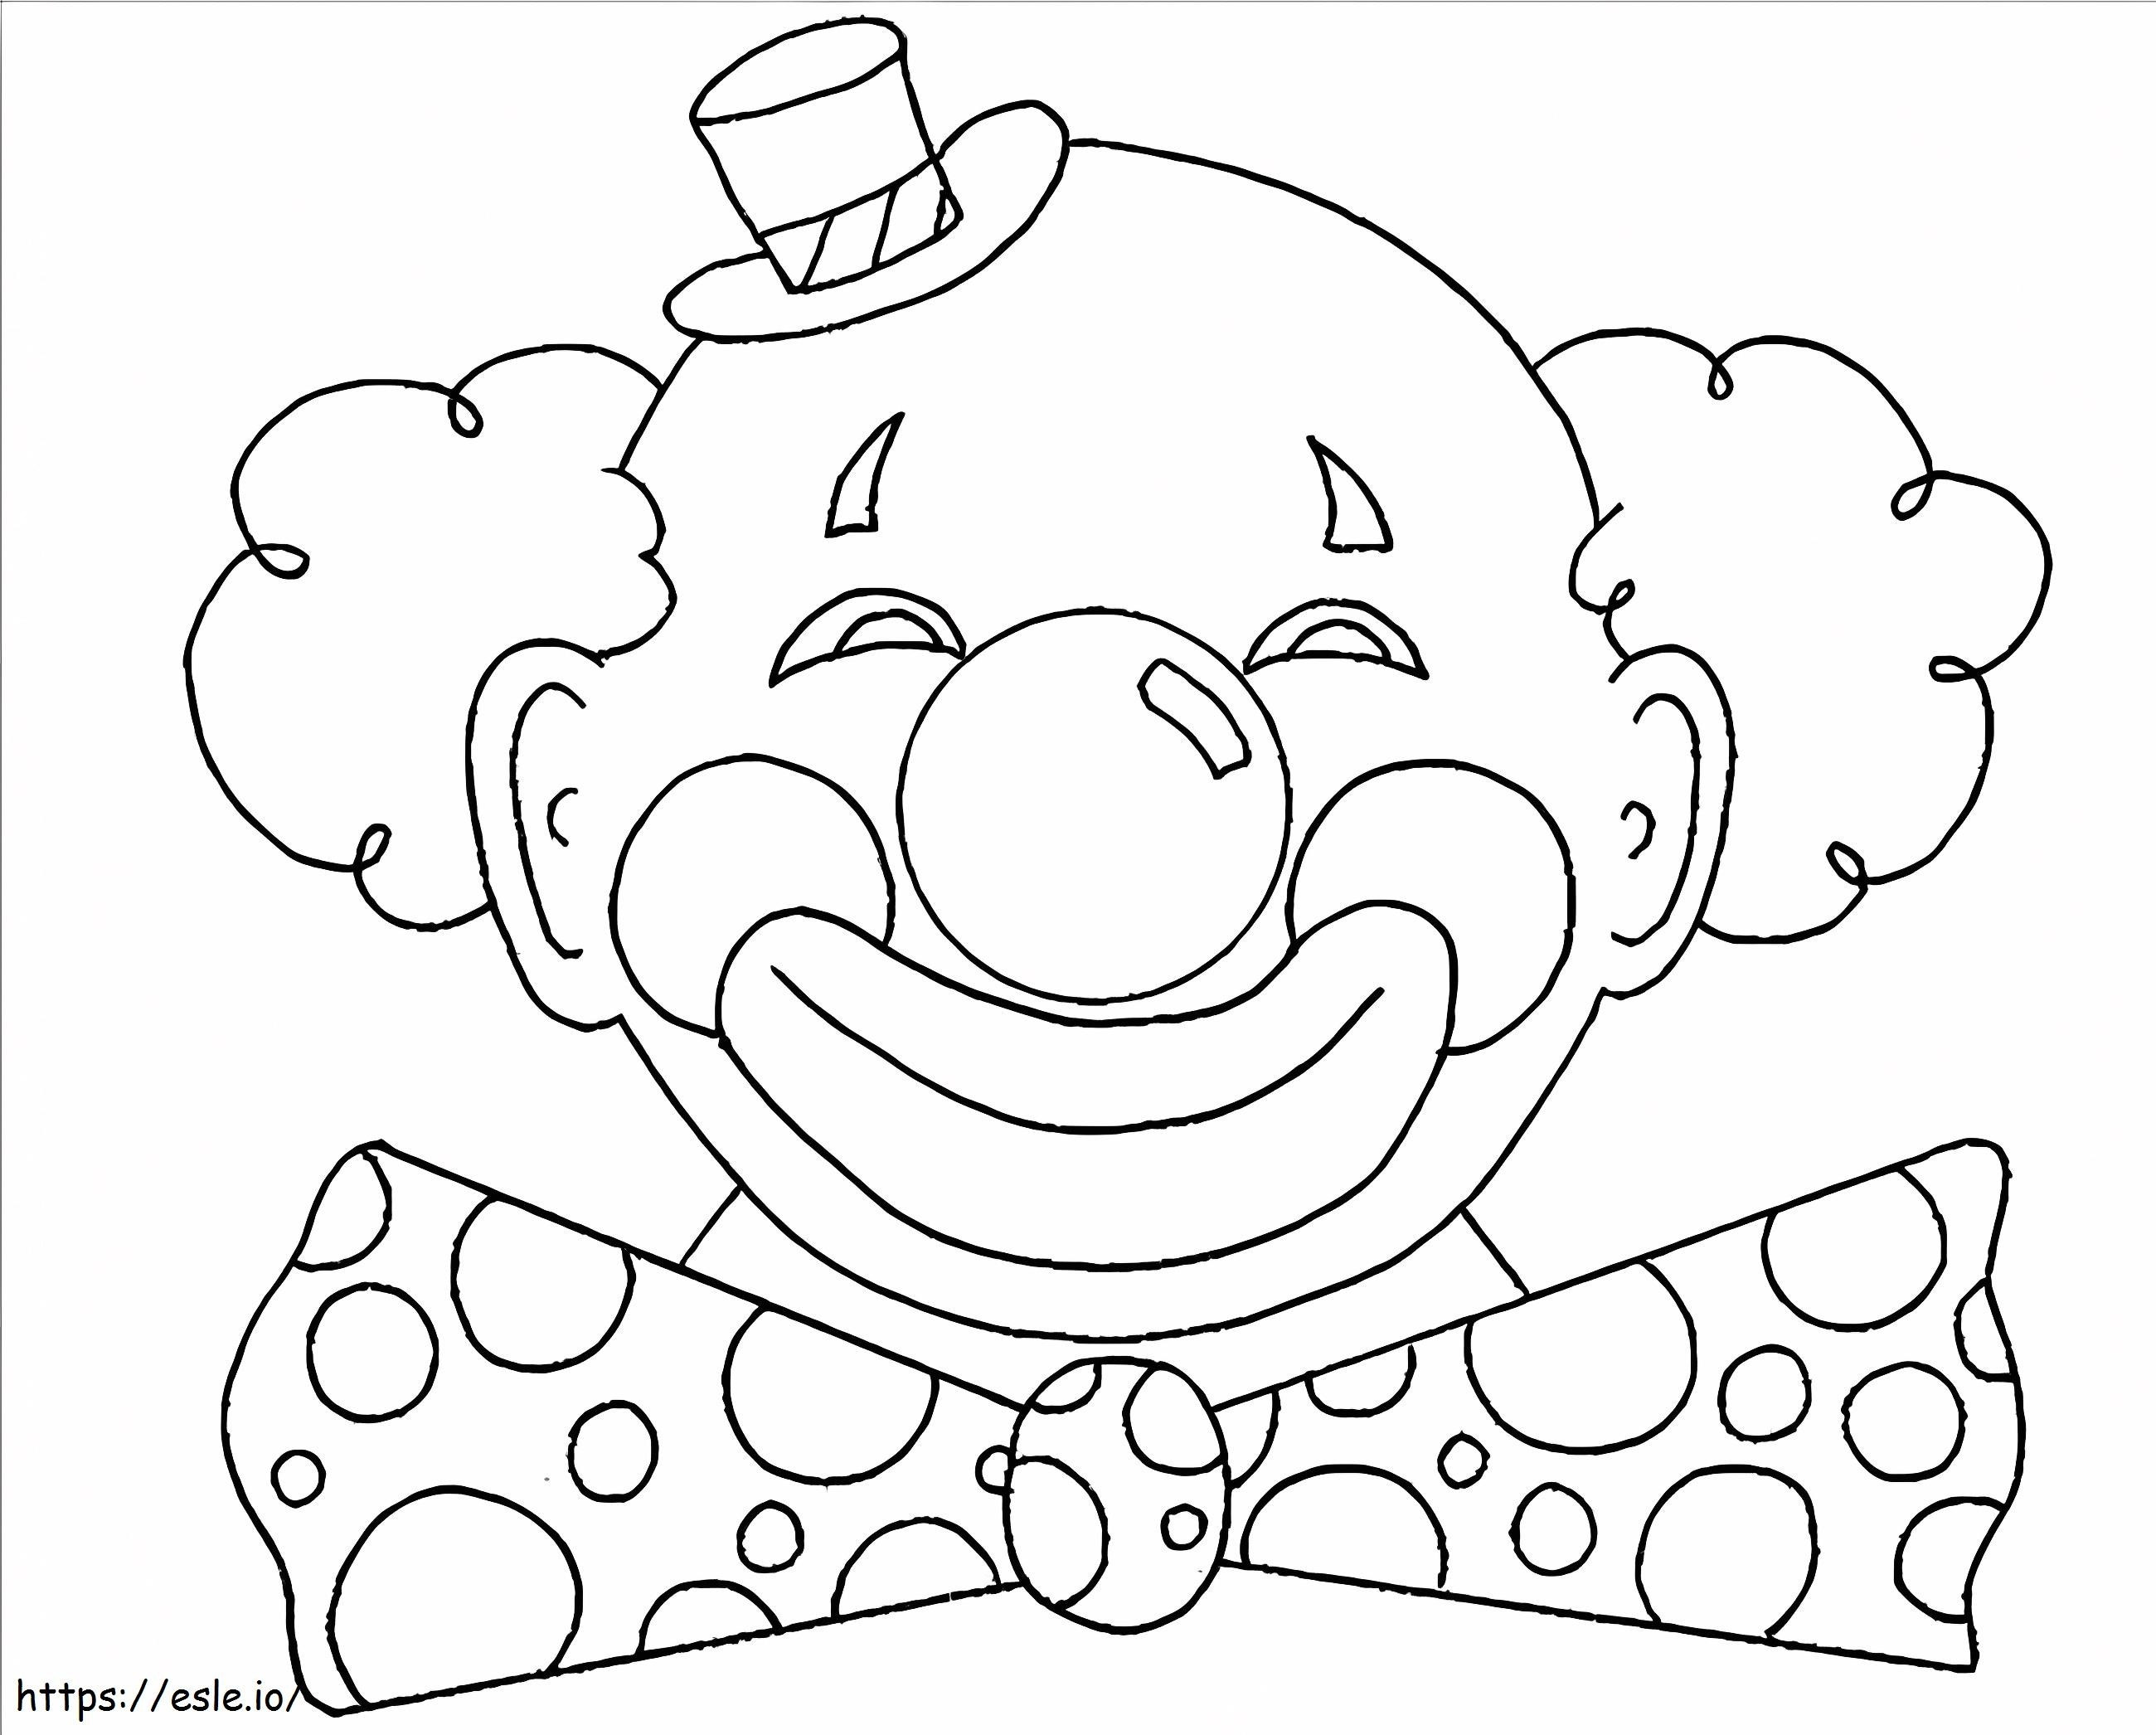 Circus Clown Smiling coloring page